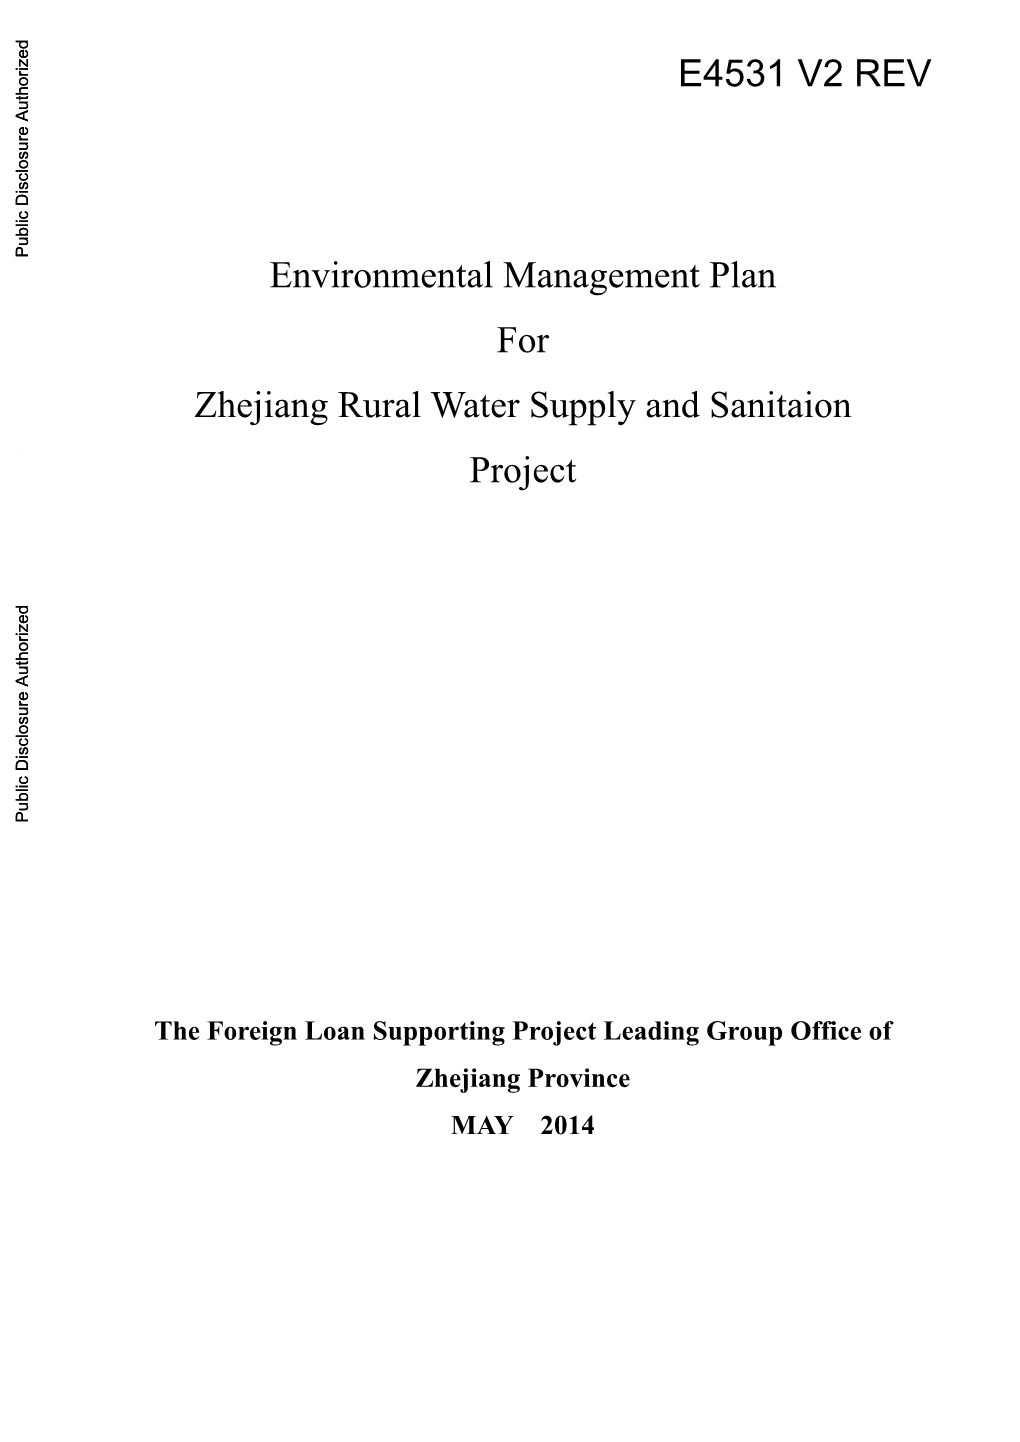 11 Environmental Impact Assessment Framework of Scattered Rural Sewage Treatment Project